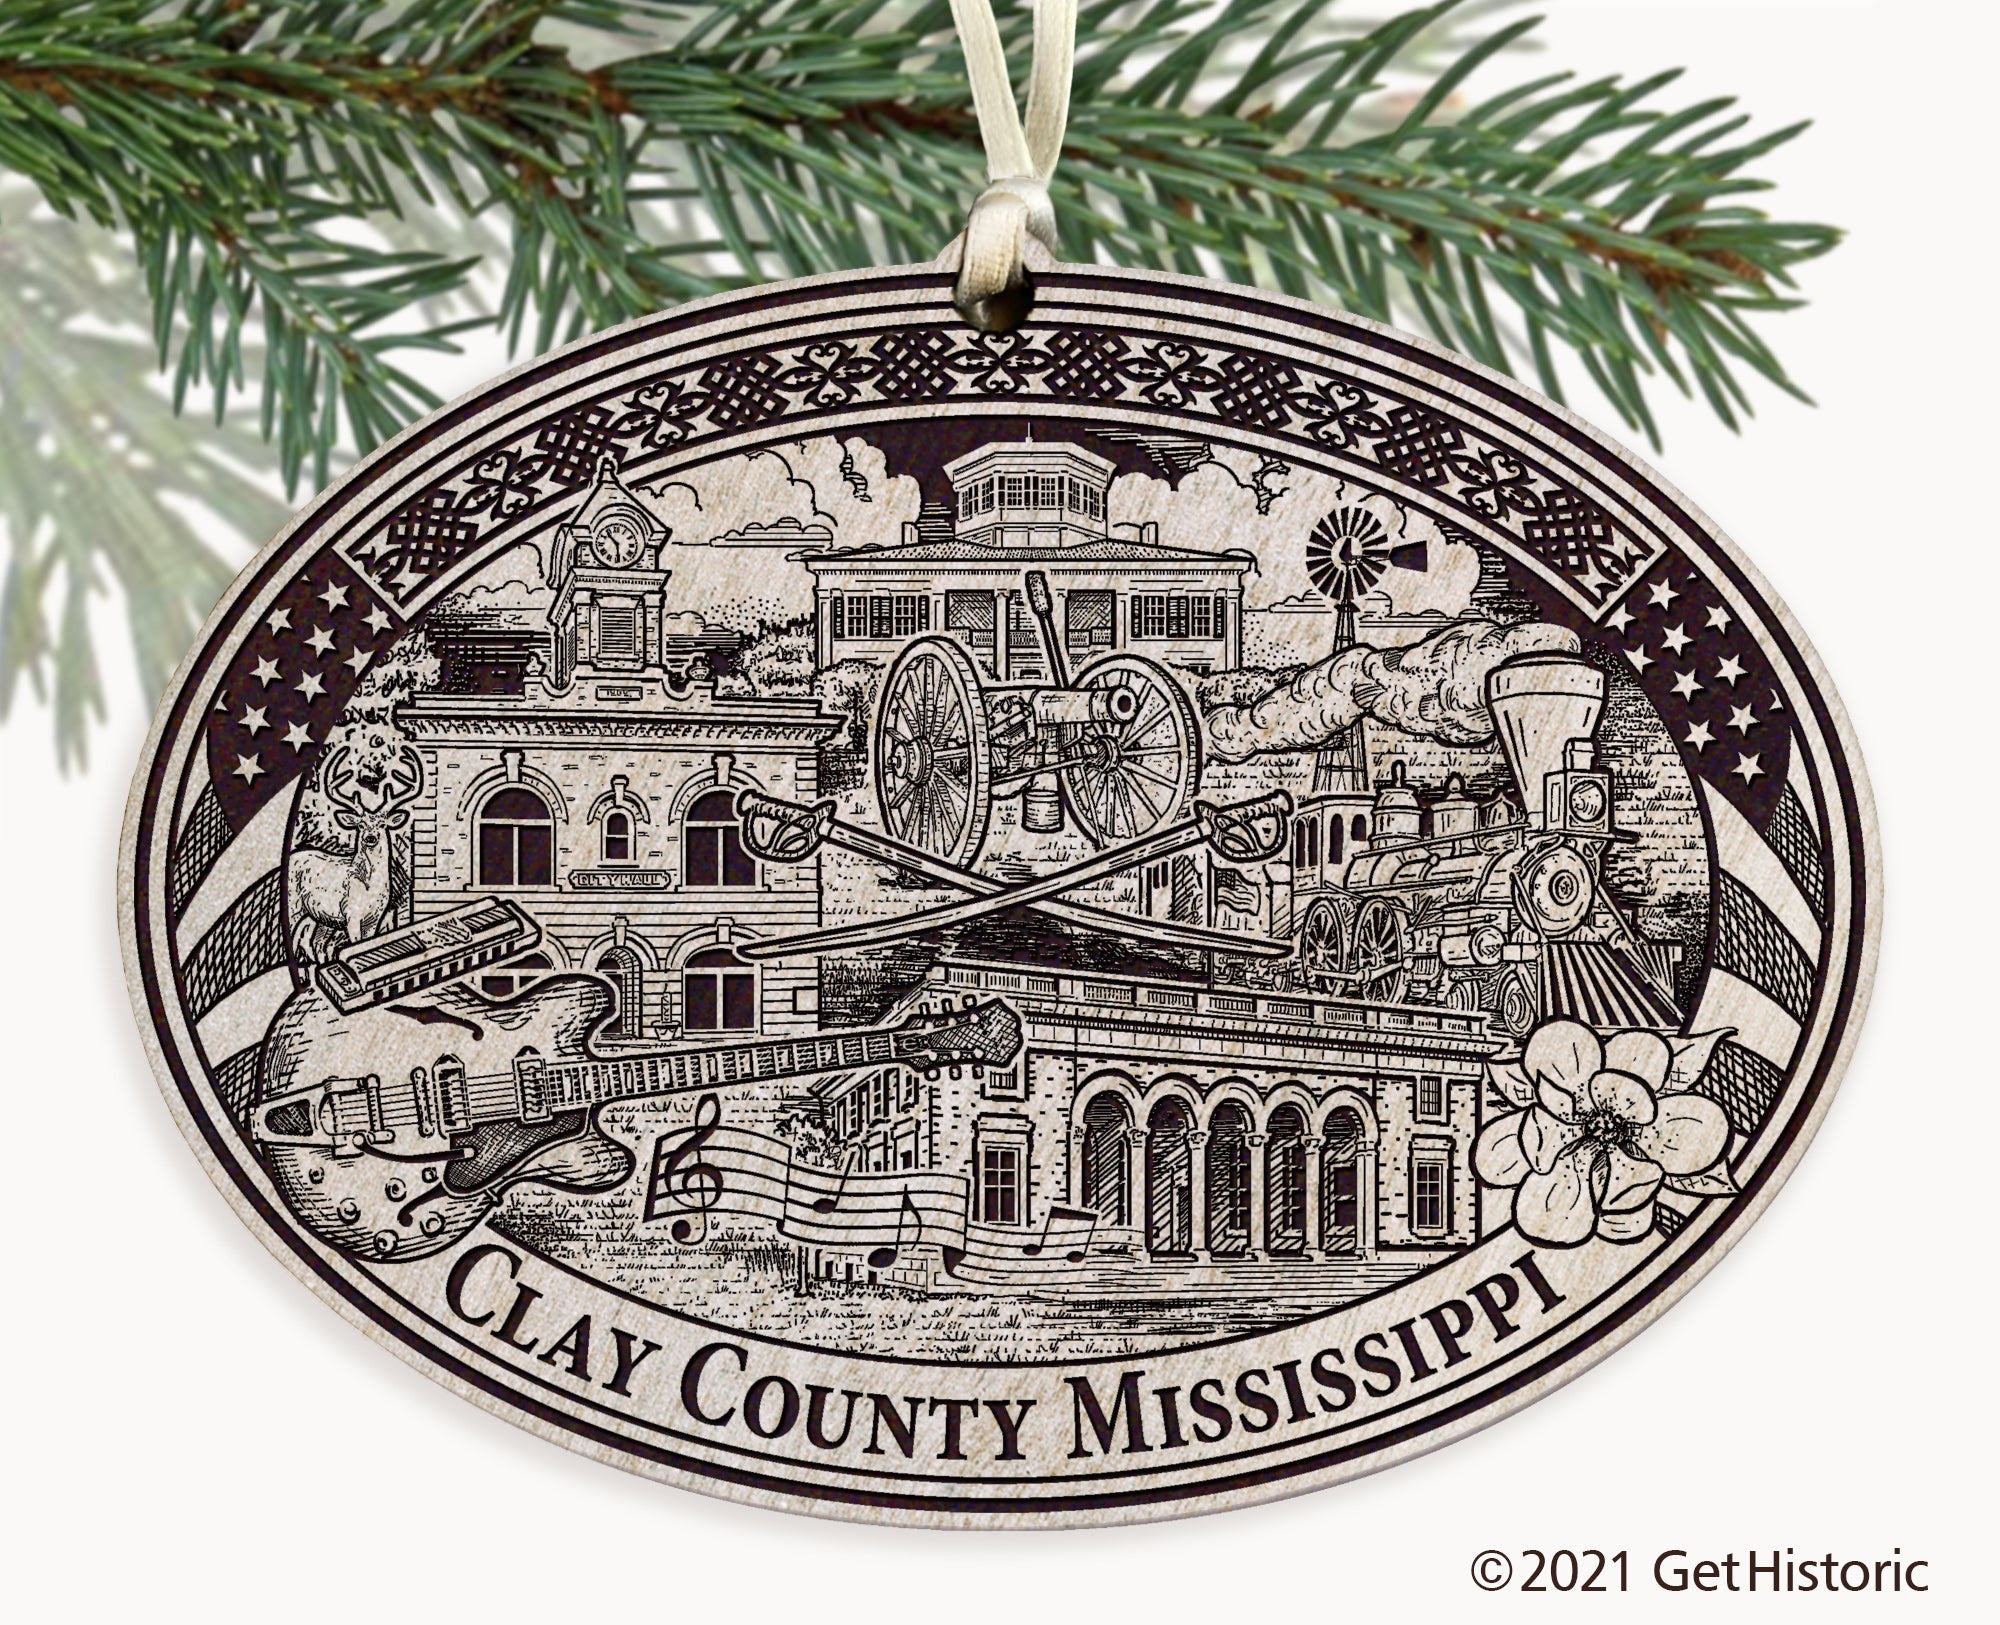 Clay County Mississippi Engraved Ornament